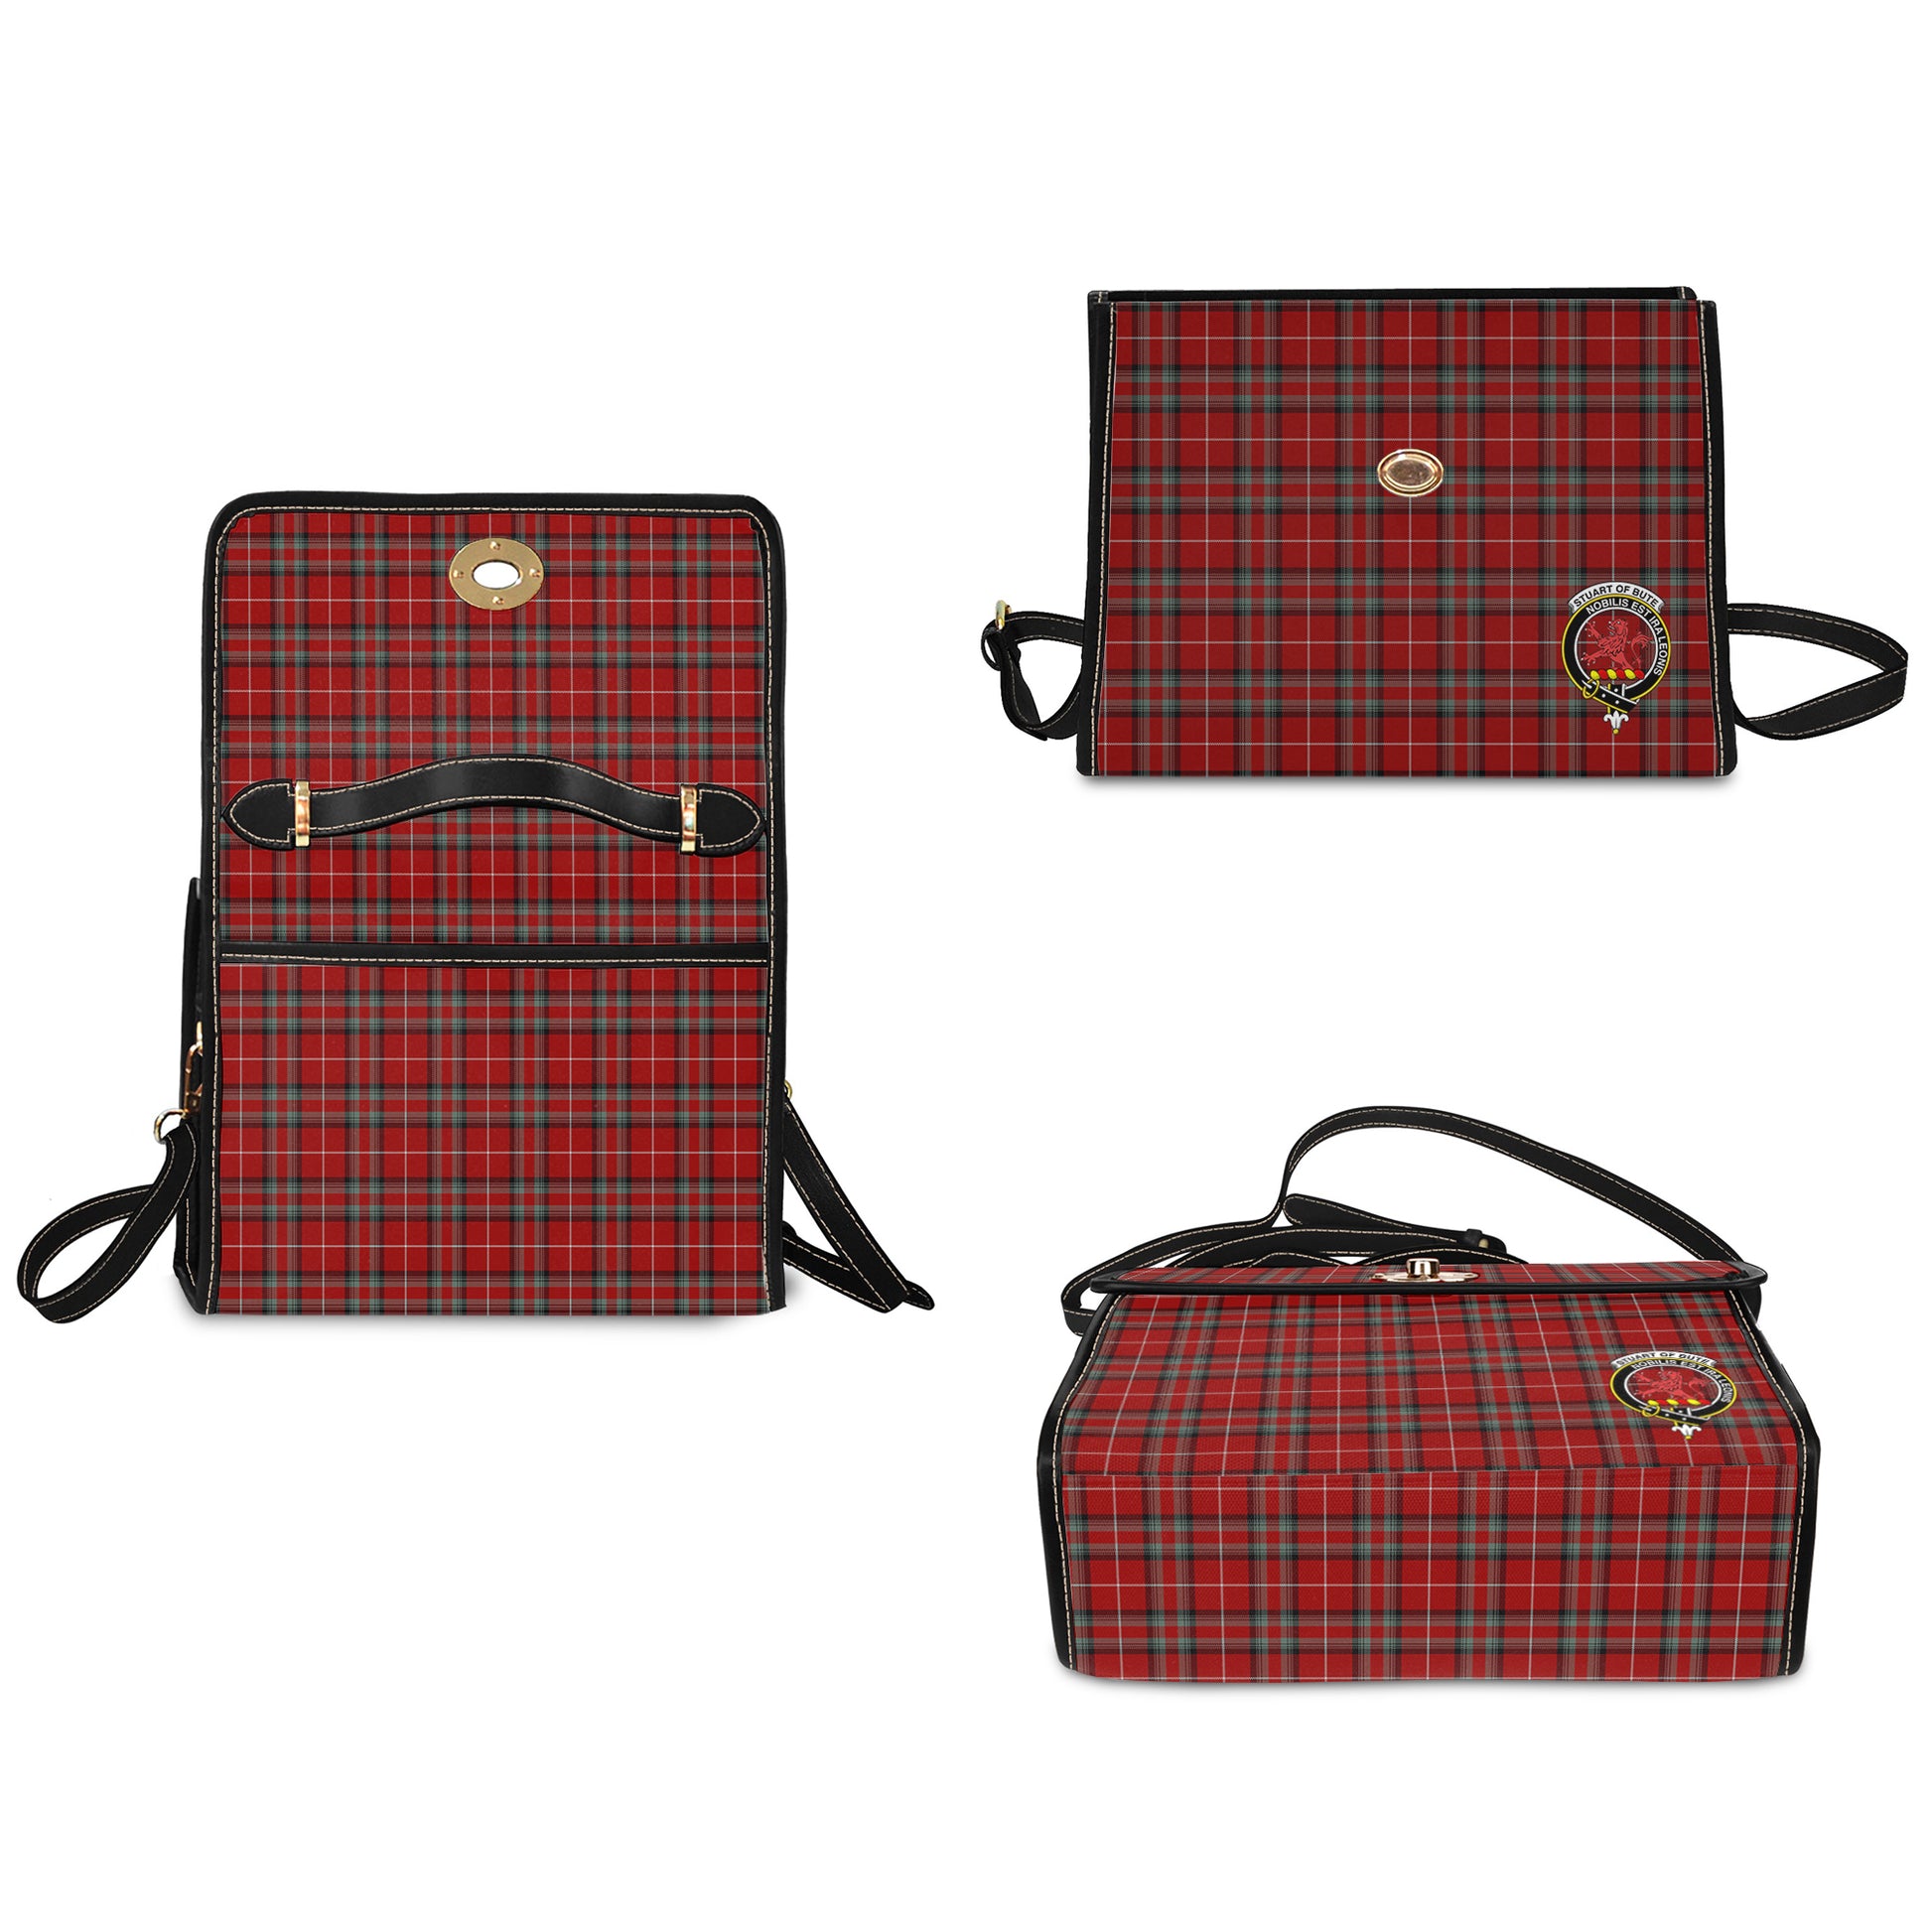 stuart-of-bute-tartan-leather-strap-waterproof-canvas-bag-with-family-crest